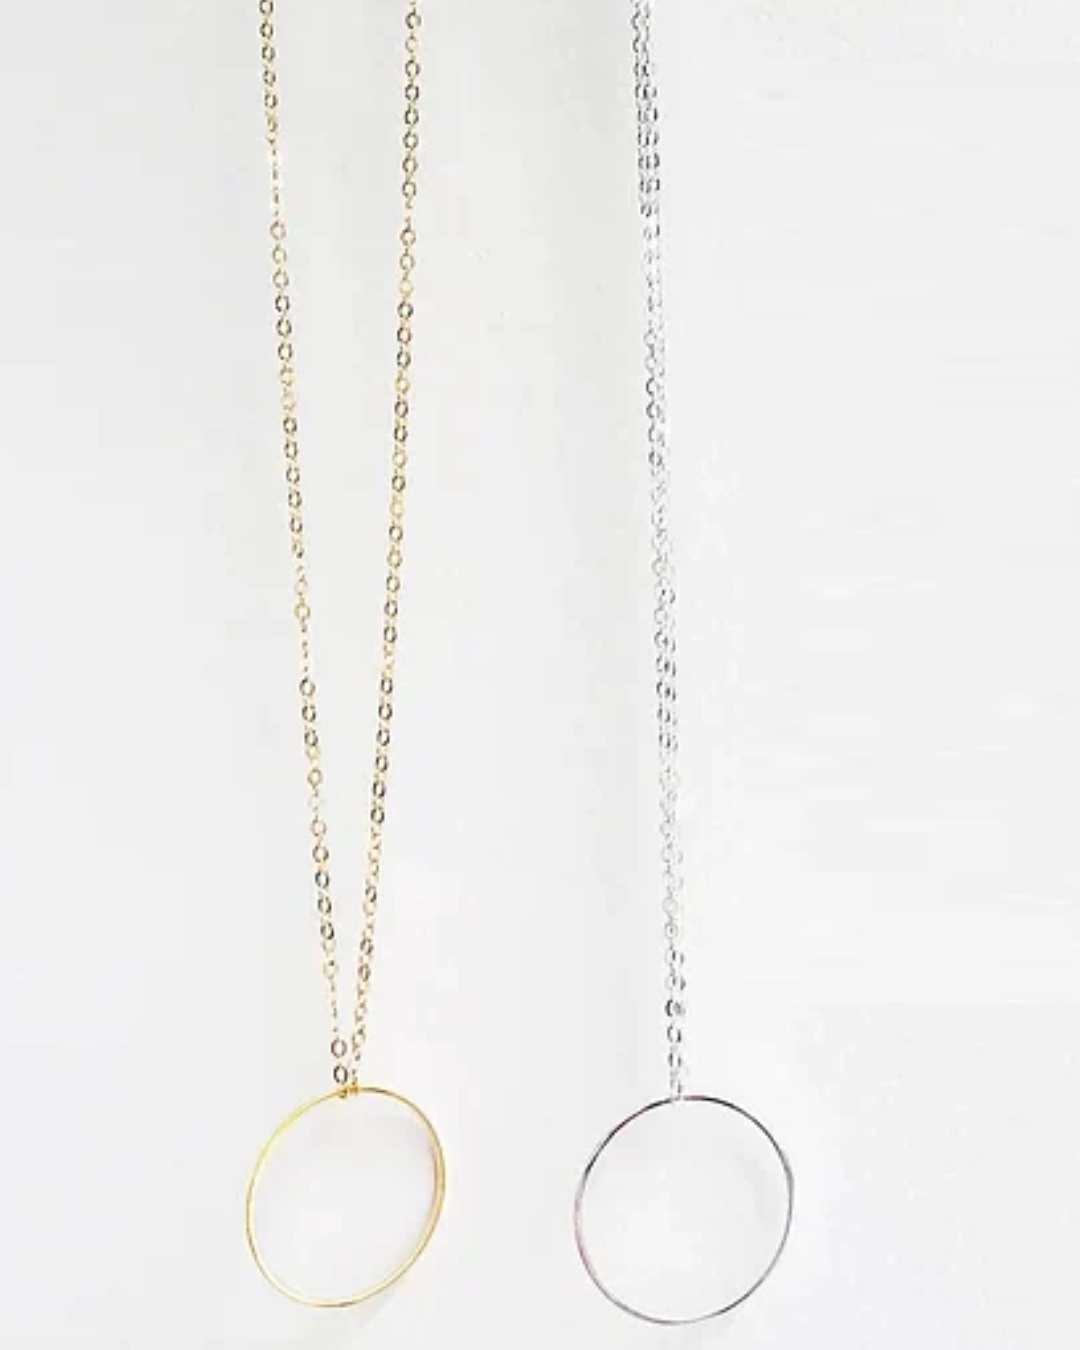 Silver and gold circle necklaces on chain